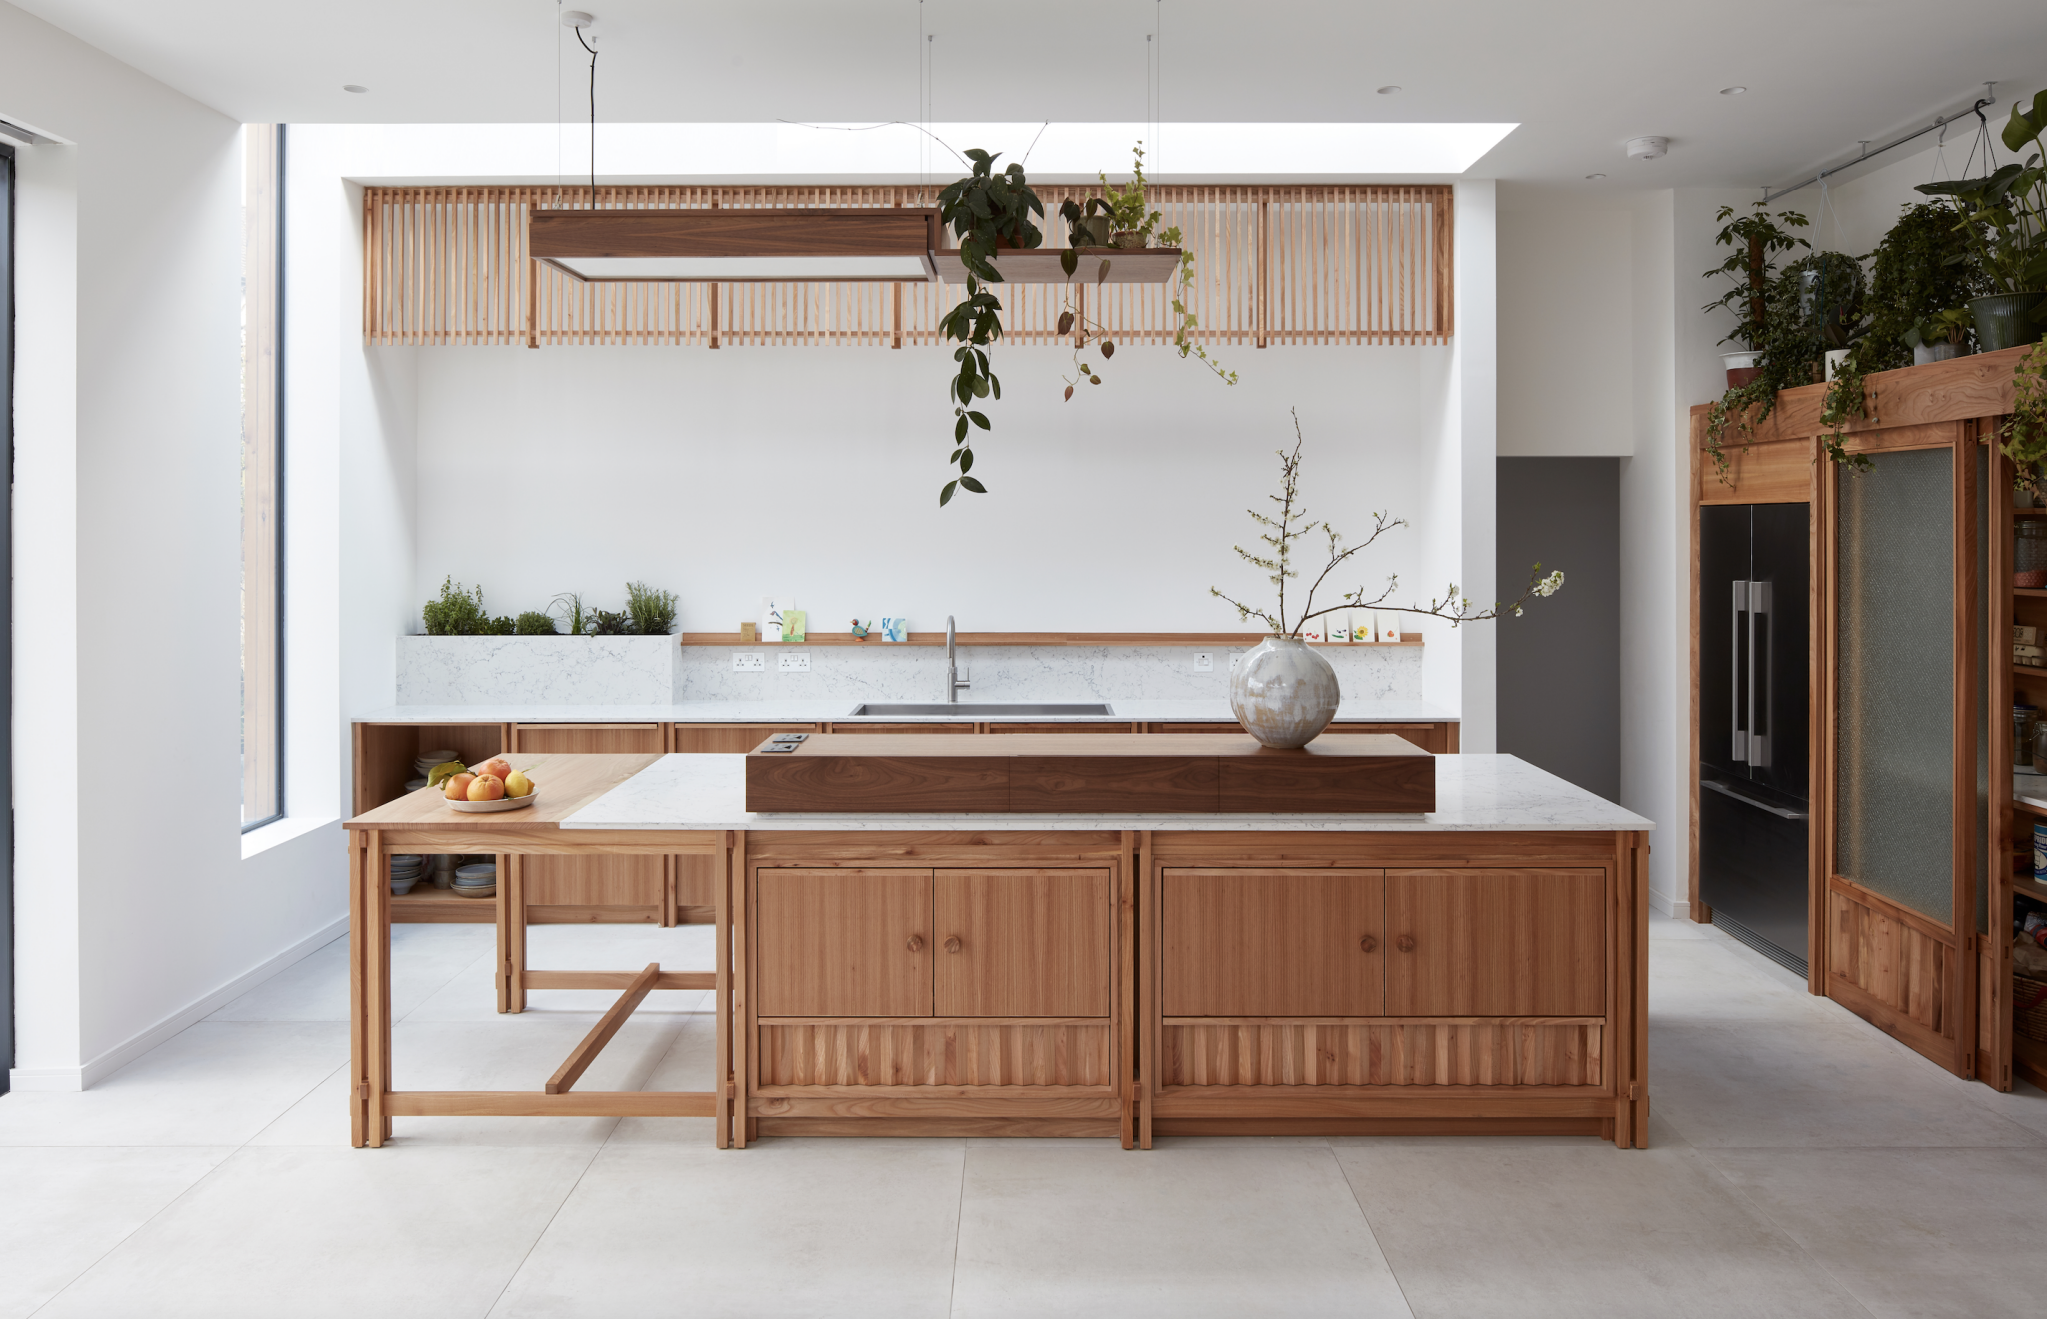 Kitchen of the Week A Japanophiles Handcrafted Kitchen on the Sussex Coast portrait 6_11